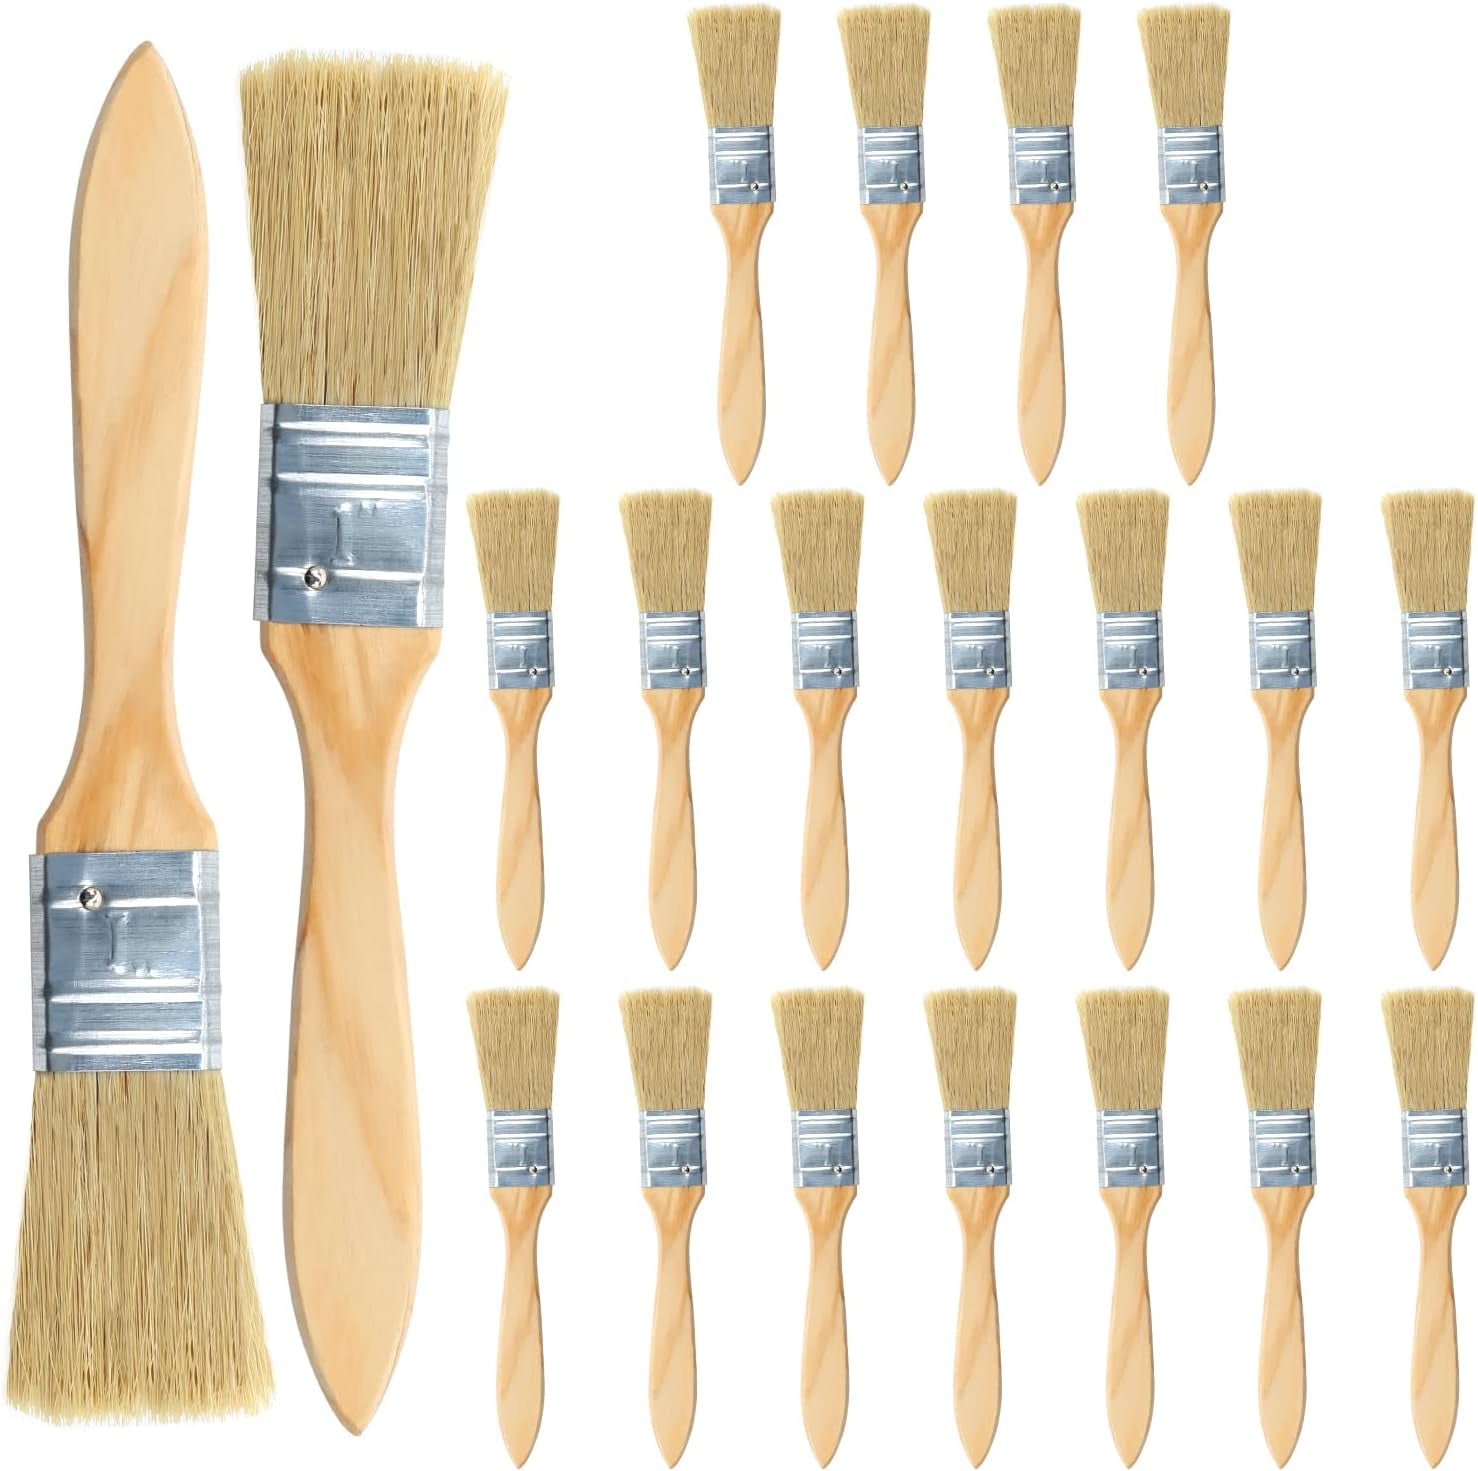 1 Inch Paint Brush Set,Paintbrush,20 Pack Small Paint Brushes for Furniture  Painting Walls, Ceilings, Woodwork